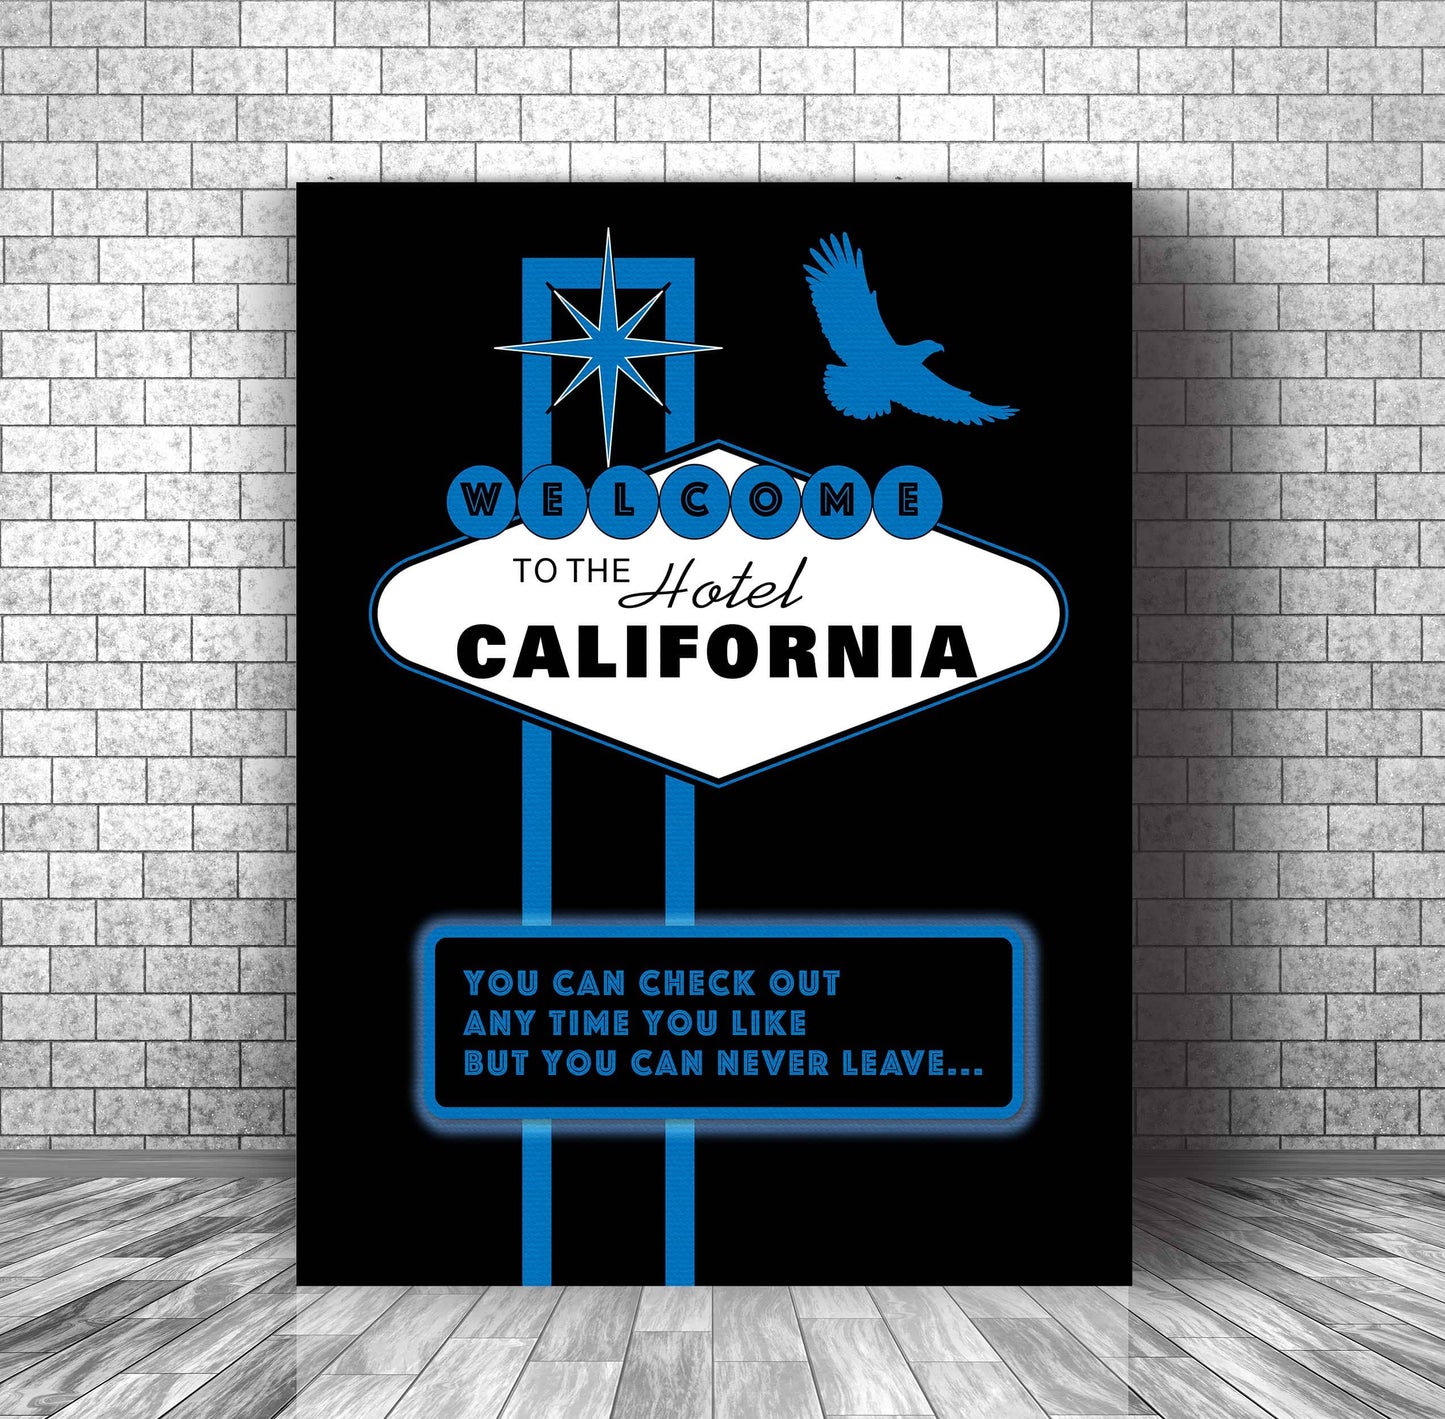 Hotel California by the Eagles - Lyric Inspired Art Print Song Lyrics Art Song Lyrics Art 16x20 Canvas Wrap 